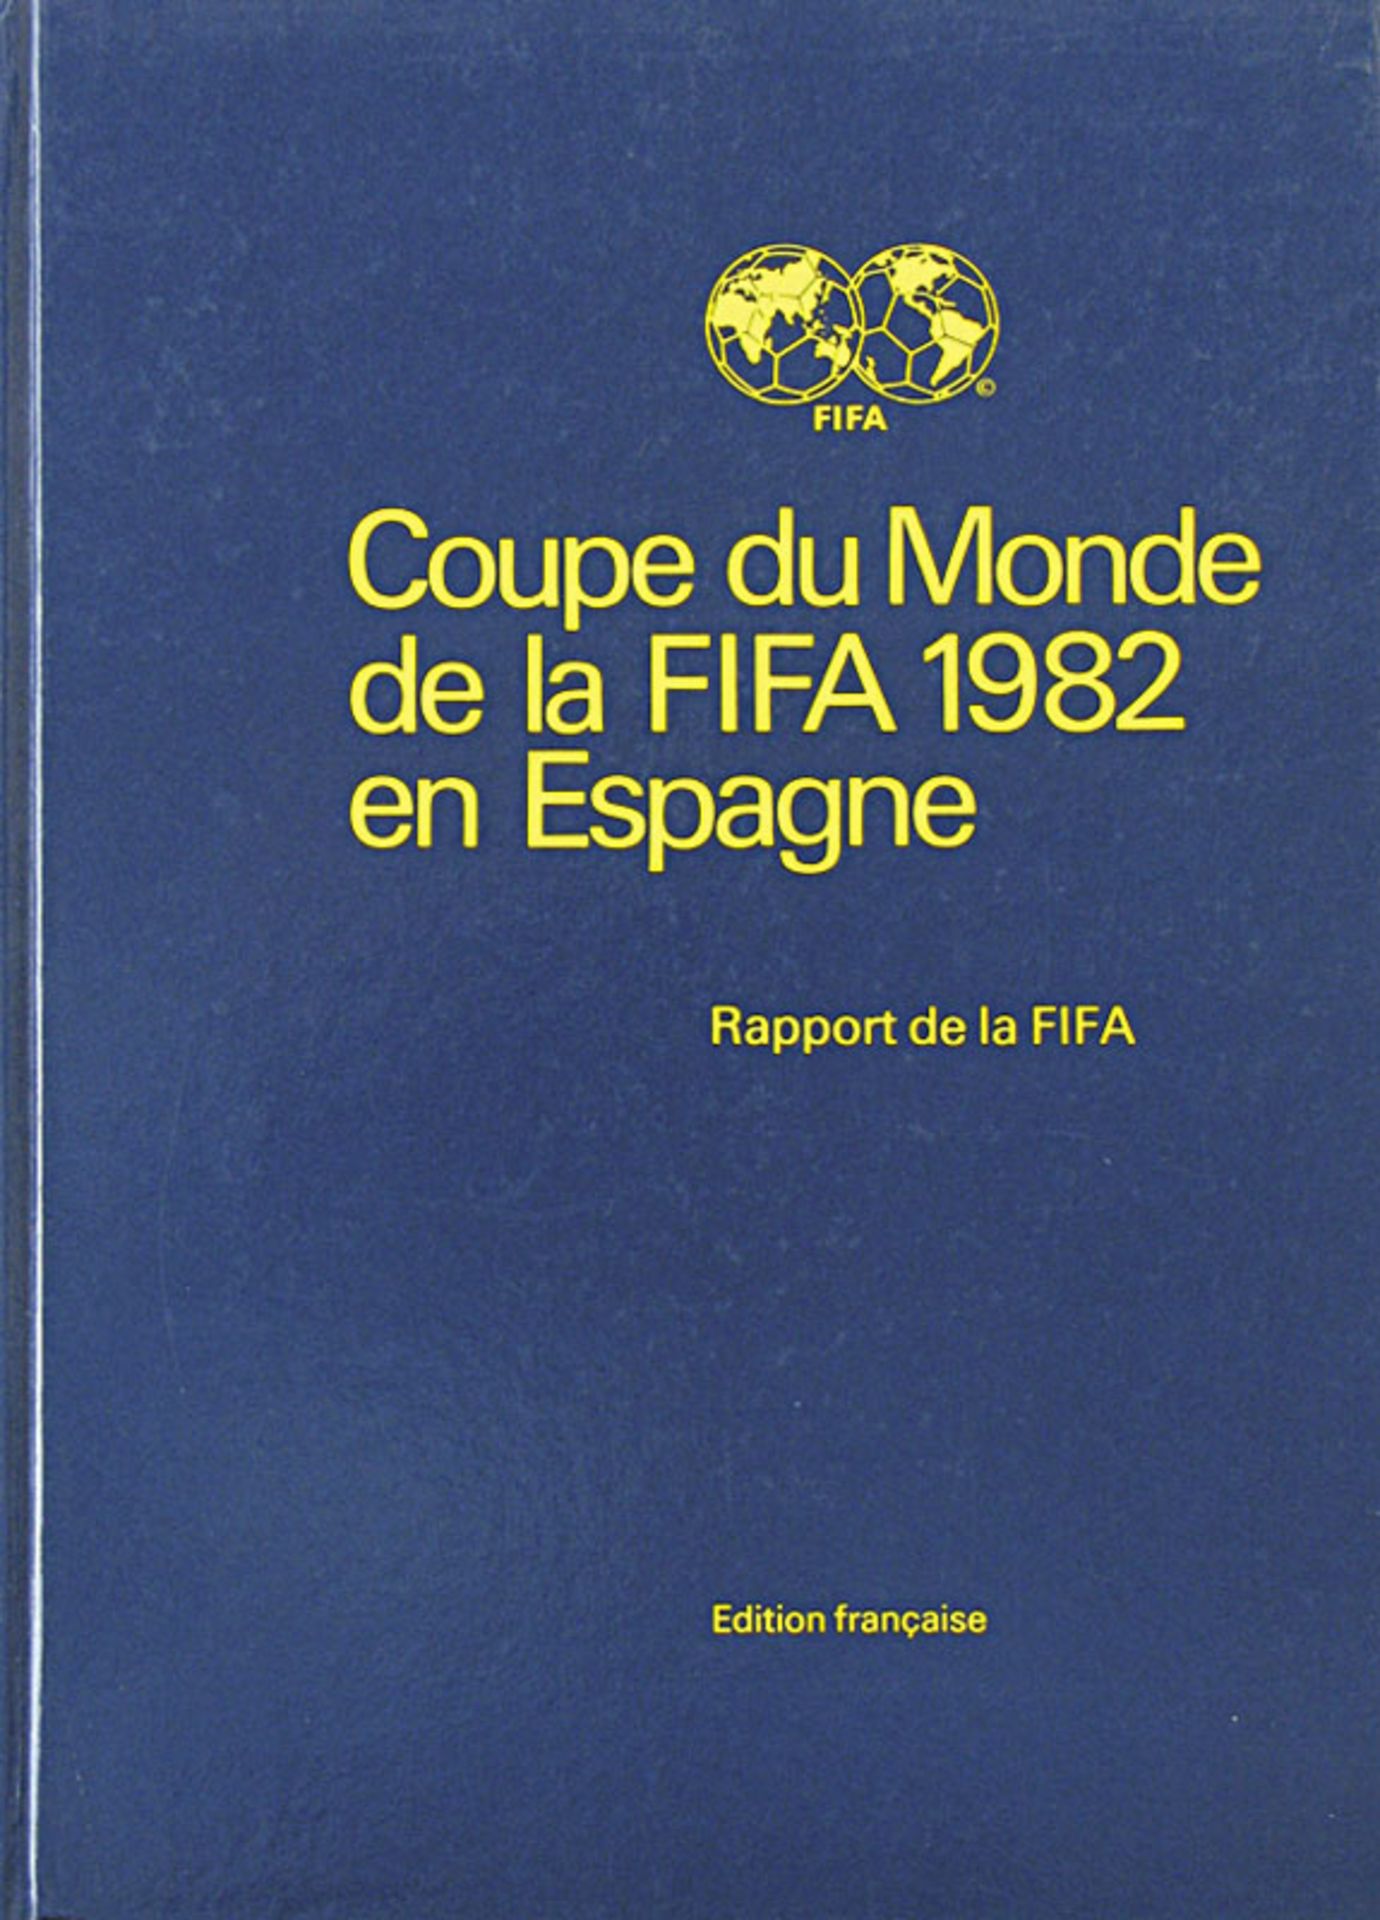 Official Report World Cup 1982 - Official FIFA report about the 1982 World Cup in Spain. French edit